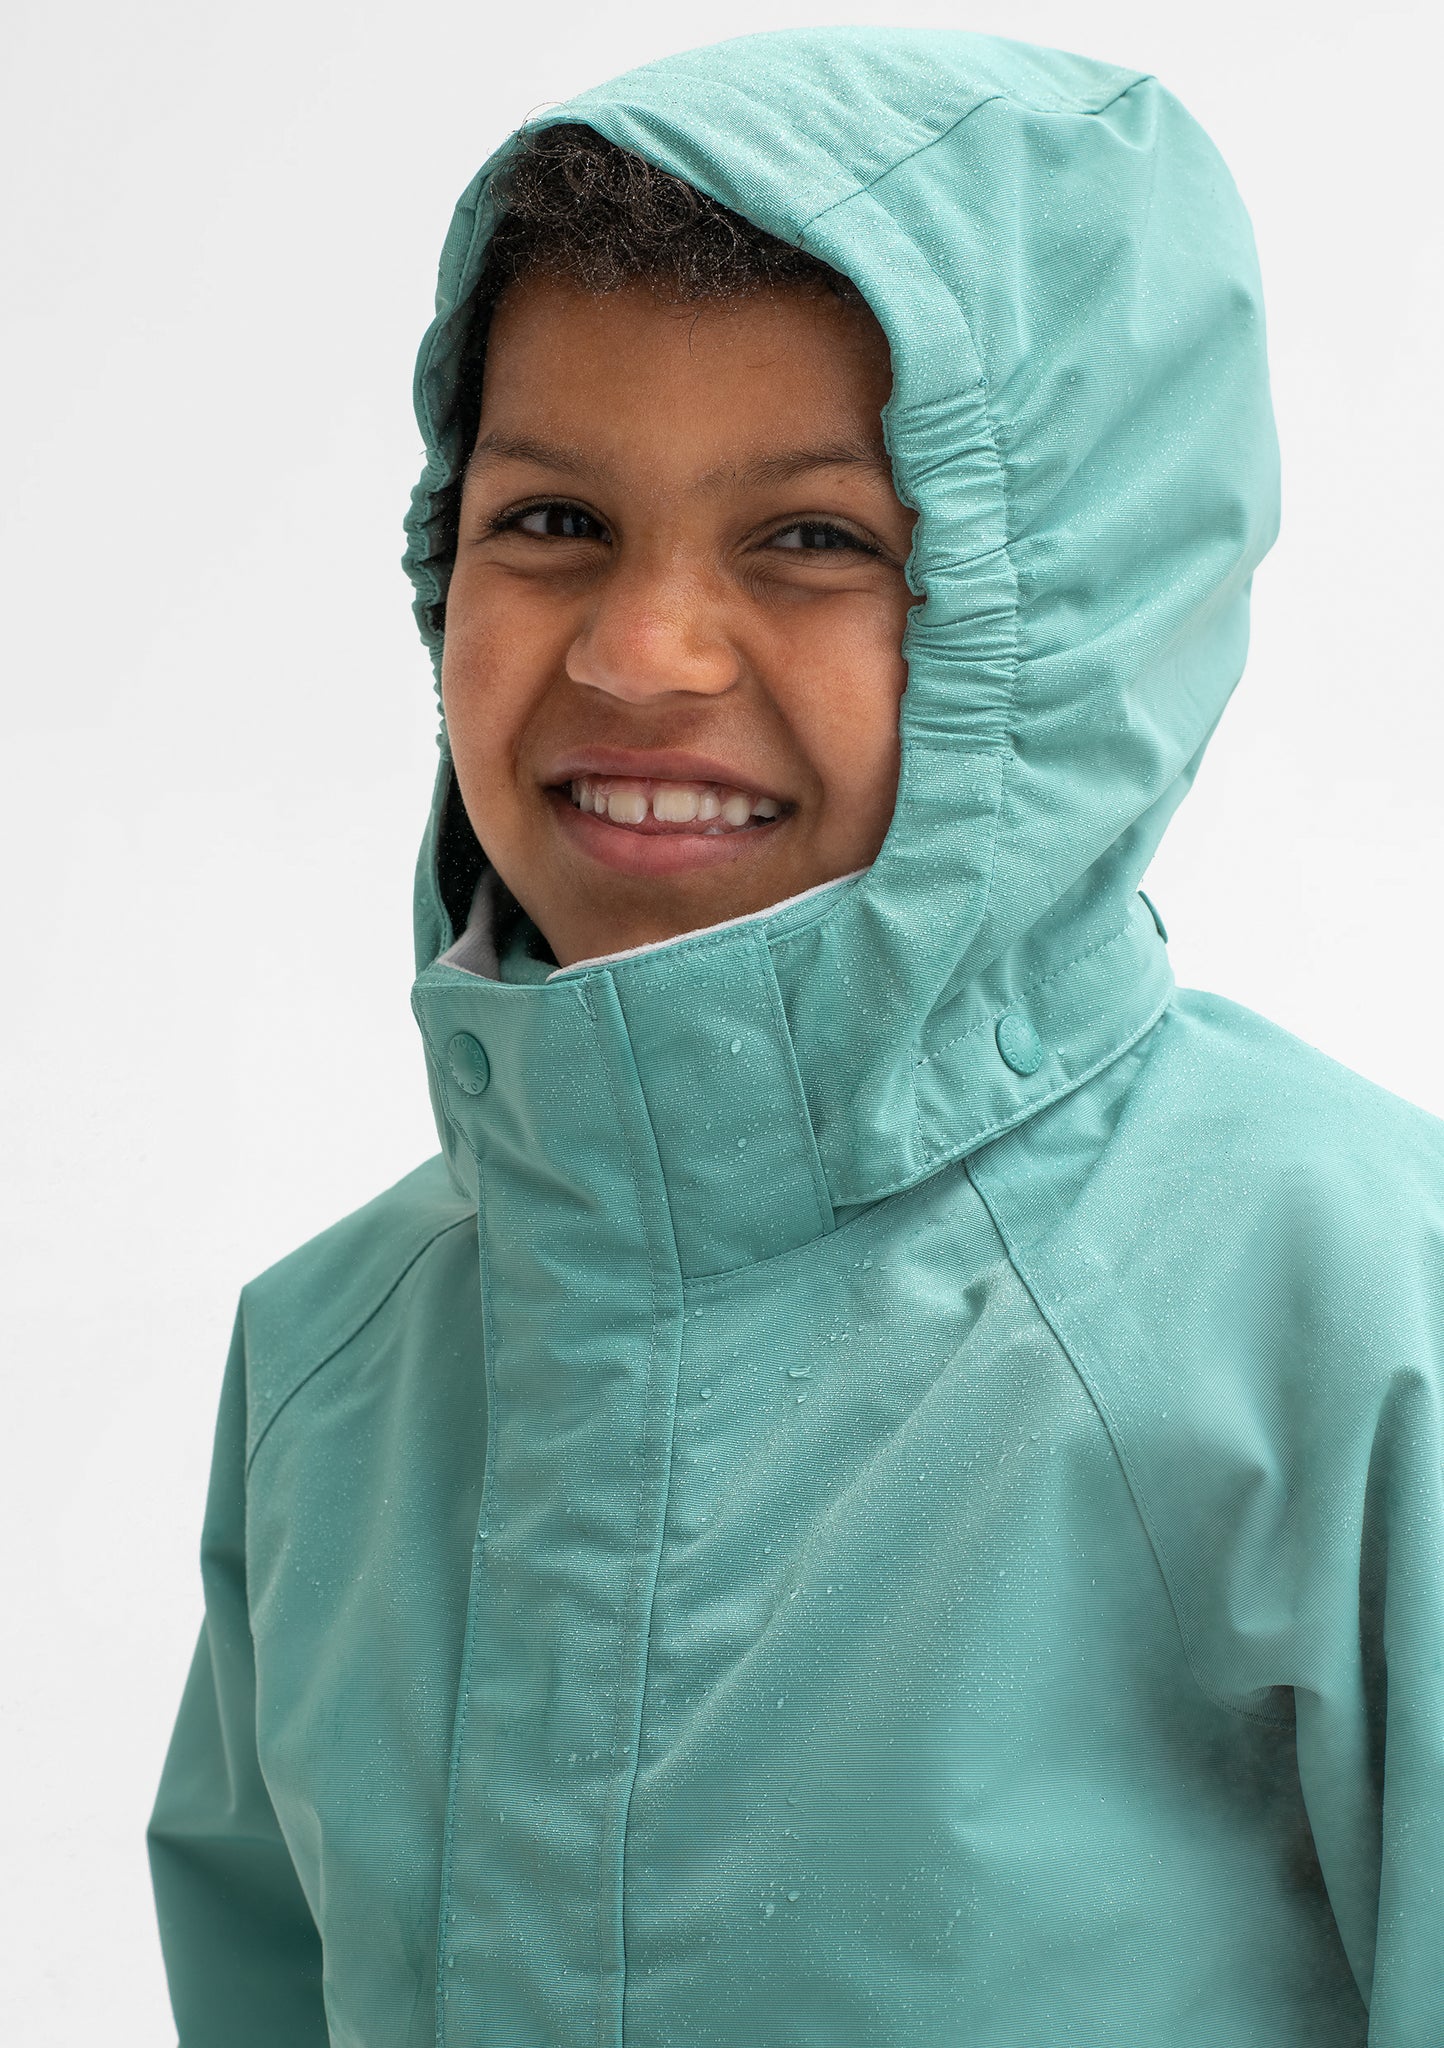 A boy smiling, wearing a green, hooded waterproof shell jacket, made of durable and lightweight fabric.